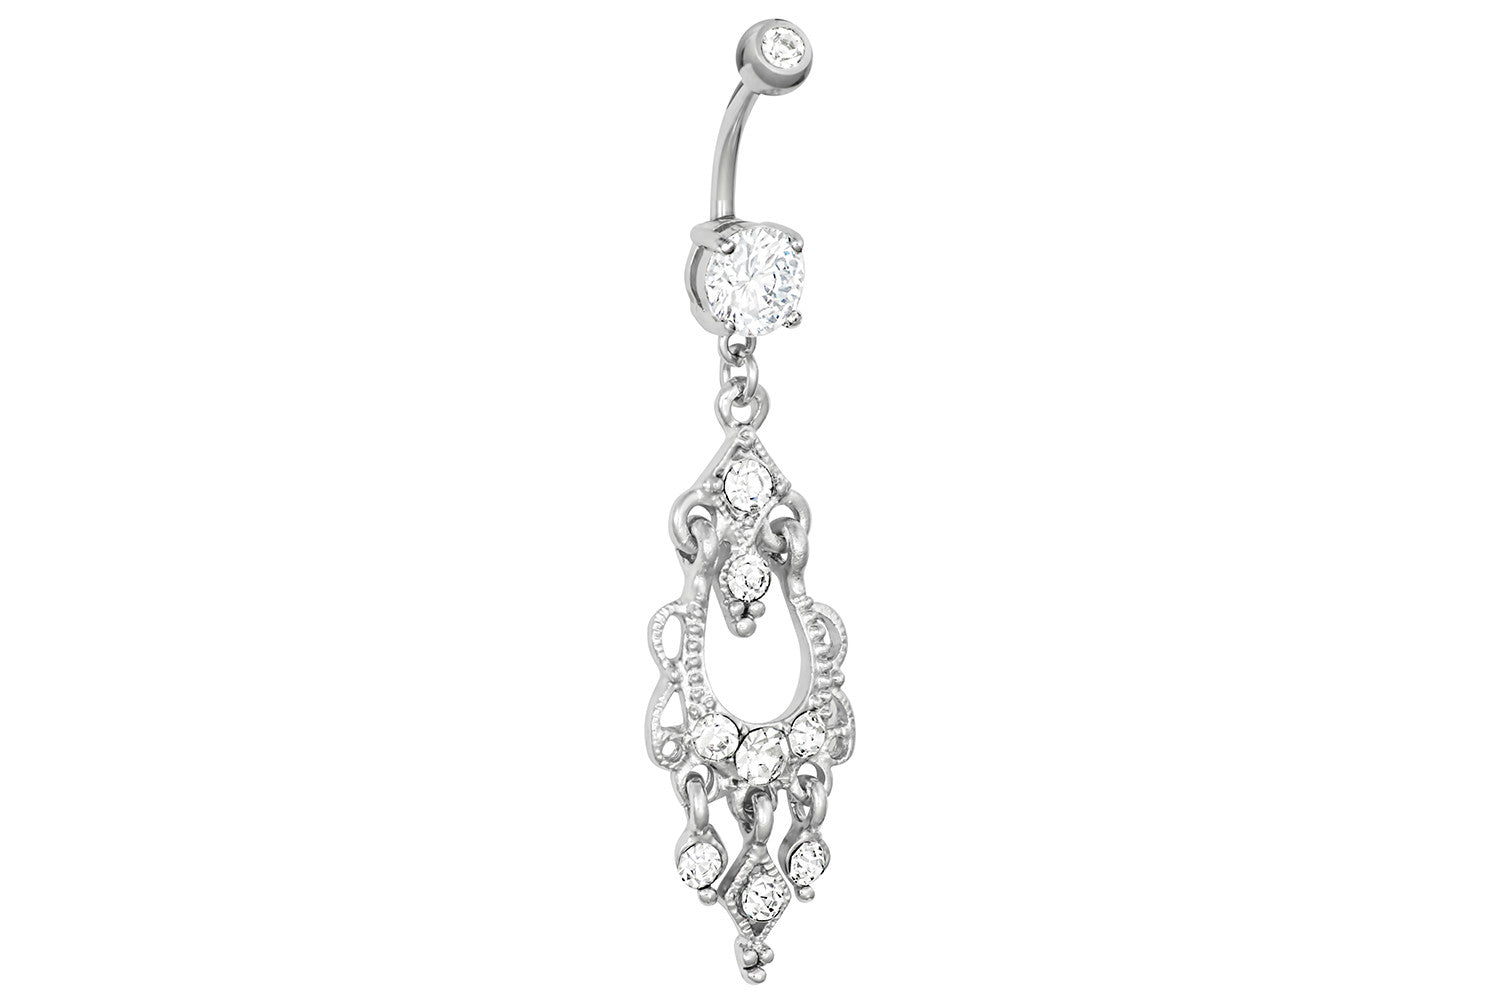 Our fancy chandelier dangle belly button ring is made with surgical grade 316L stainless steel. This 14 gauge body jewelry is hypoallergenic and nickel free, and the total dangle length is 1.5 inches.